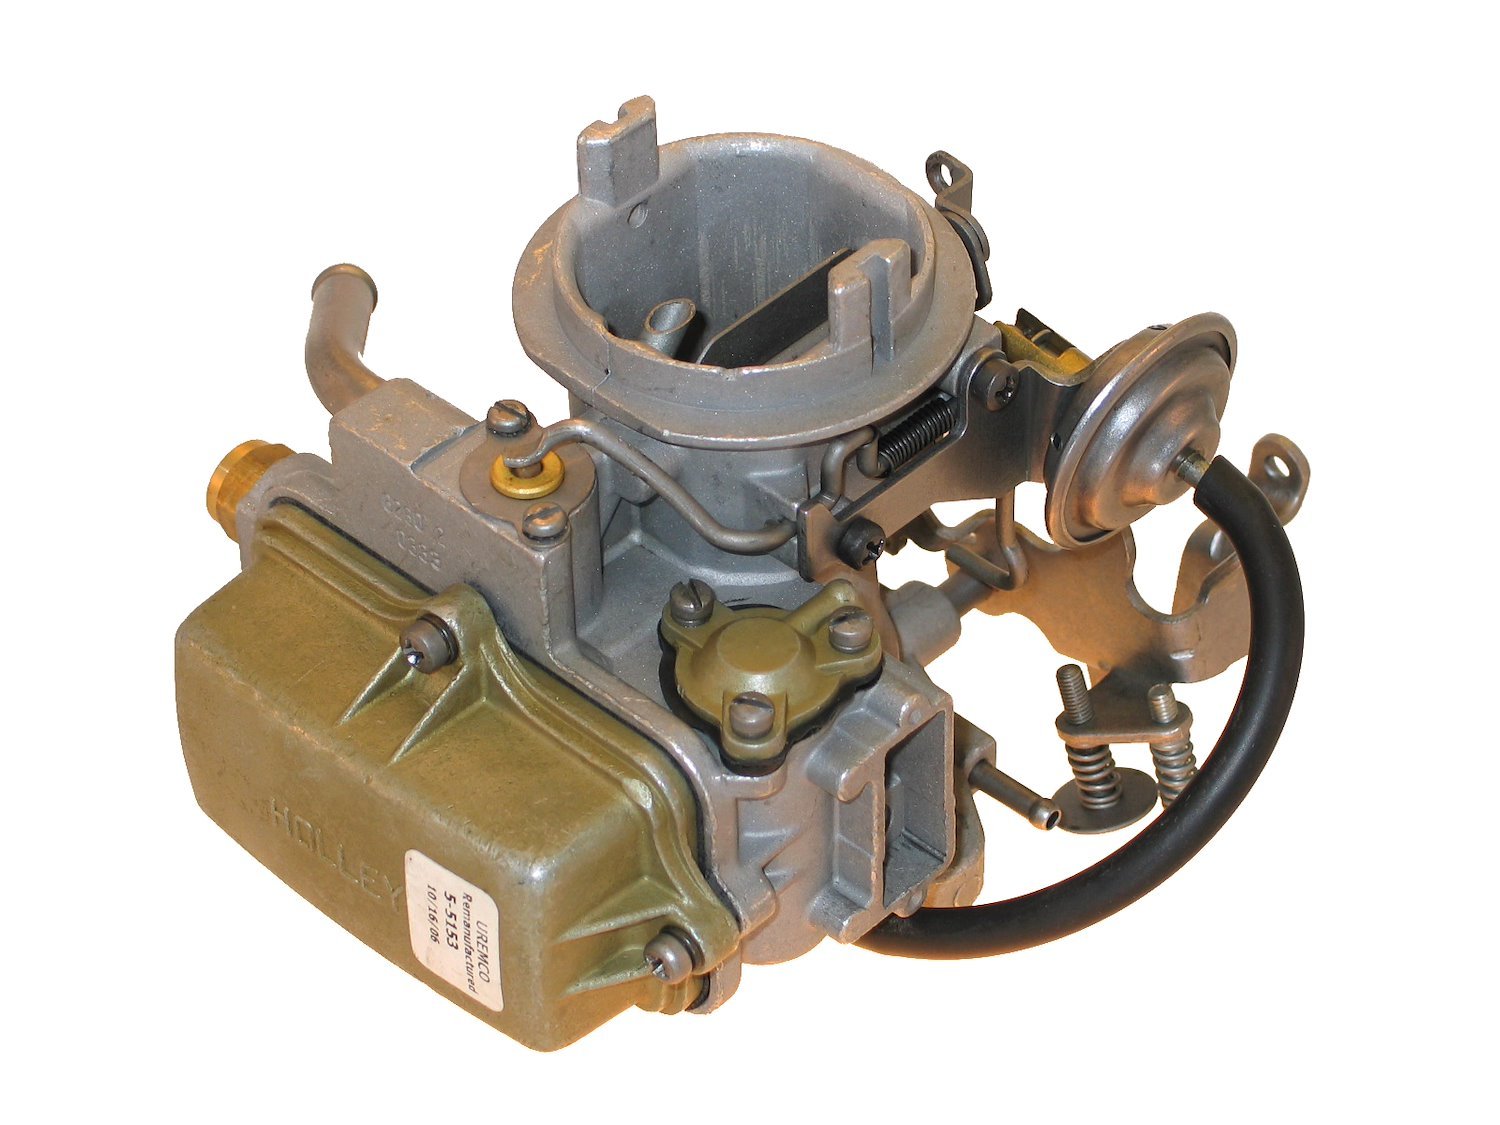 7-7143 Holley Remanufactured Carburetor, 1920-Style